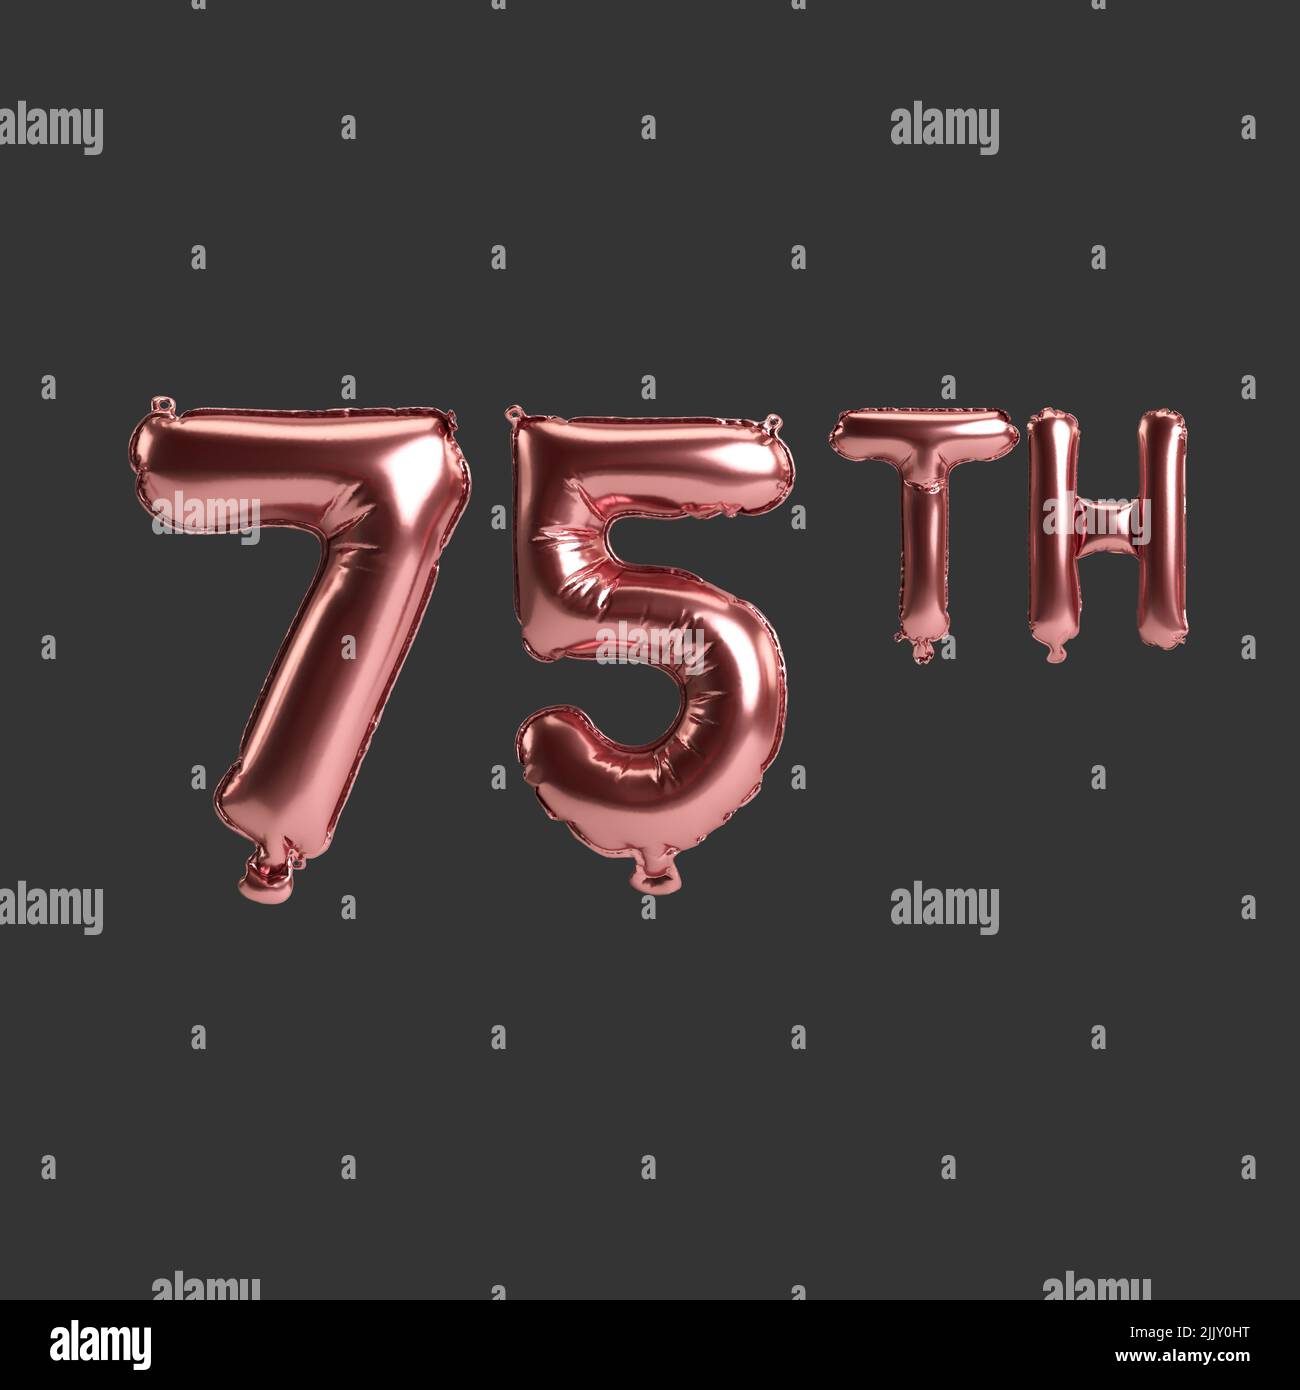 3d illustration of 75th metal rose balloons isolated on black background Stock Photo